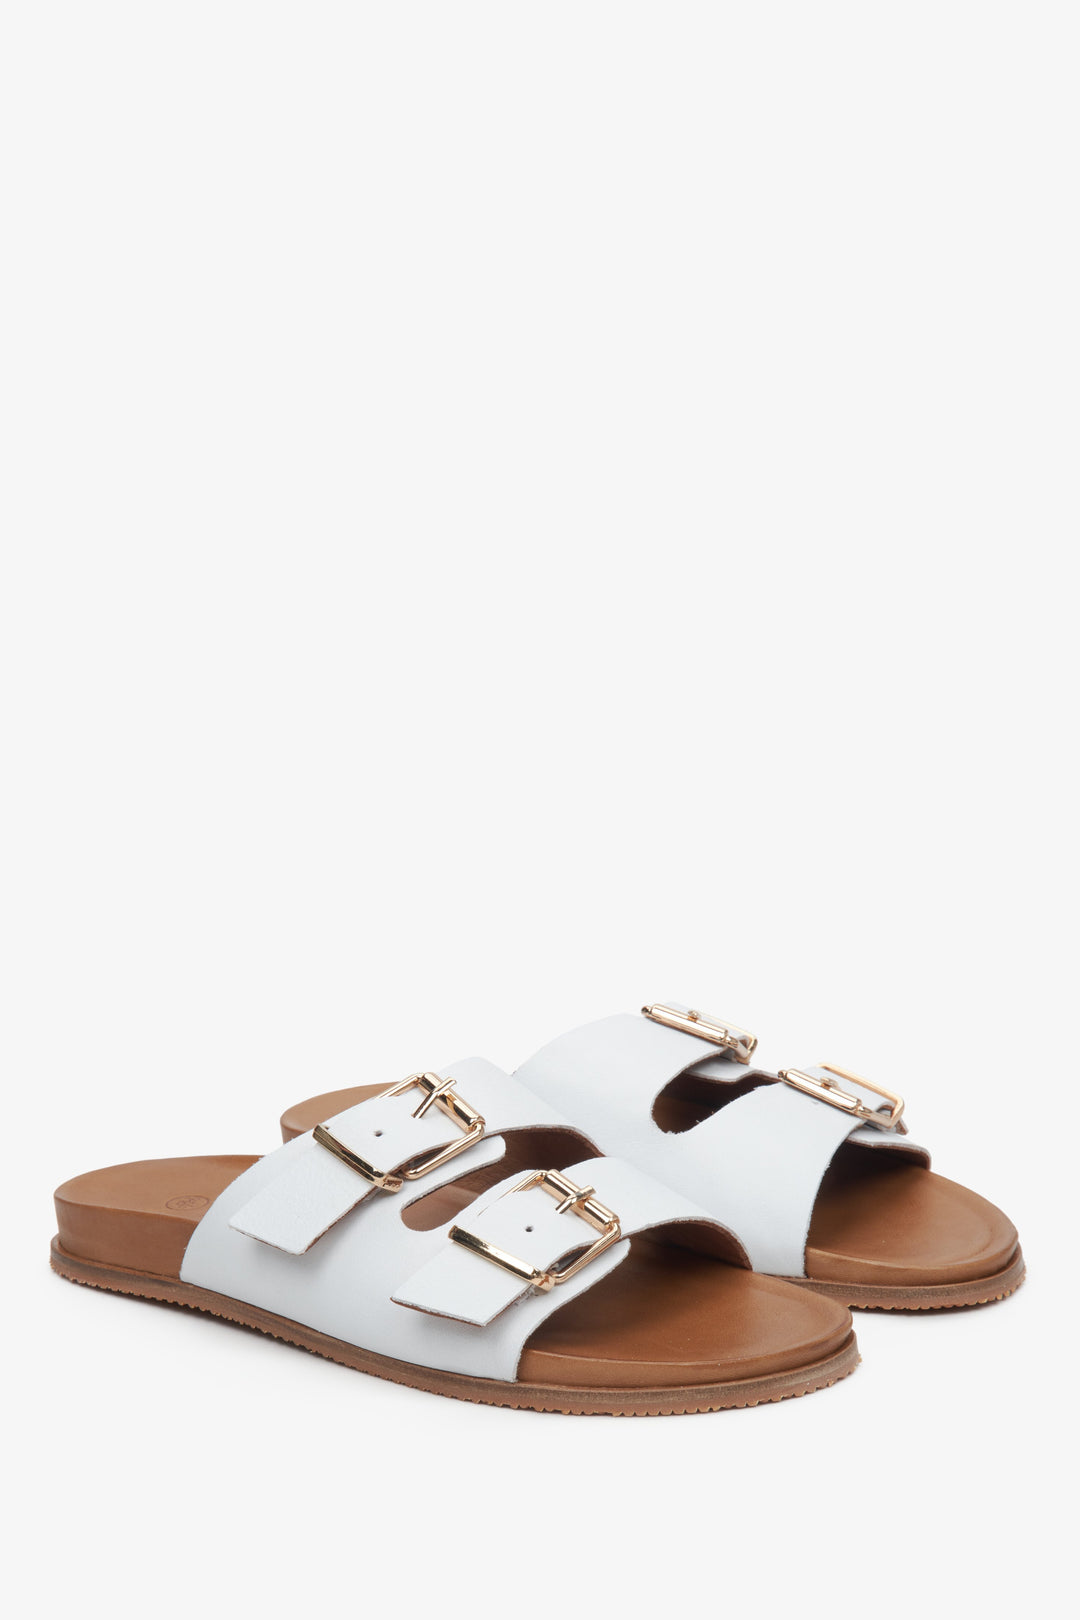 Women's slide sandals in white color Estro made of natural leather.